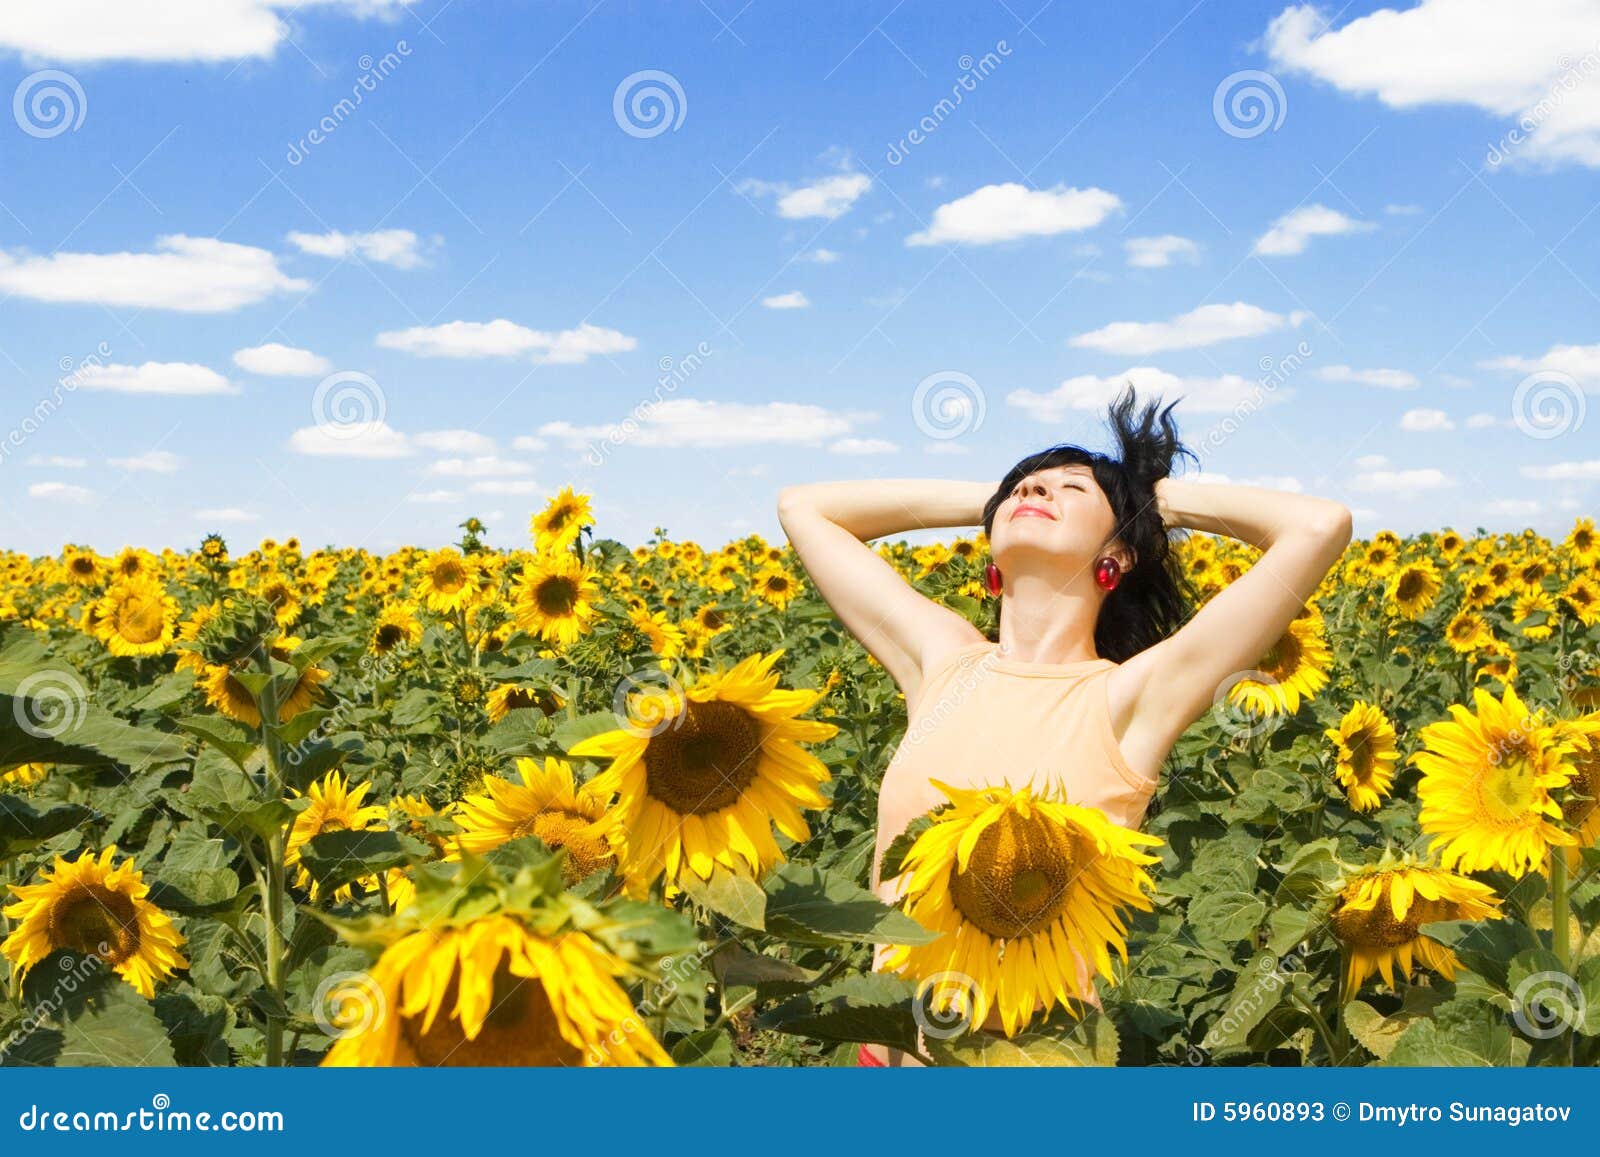 Woman In The Field Of Sunflowers Stock Image Image Of Color Female